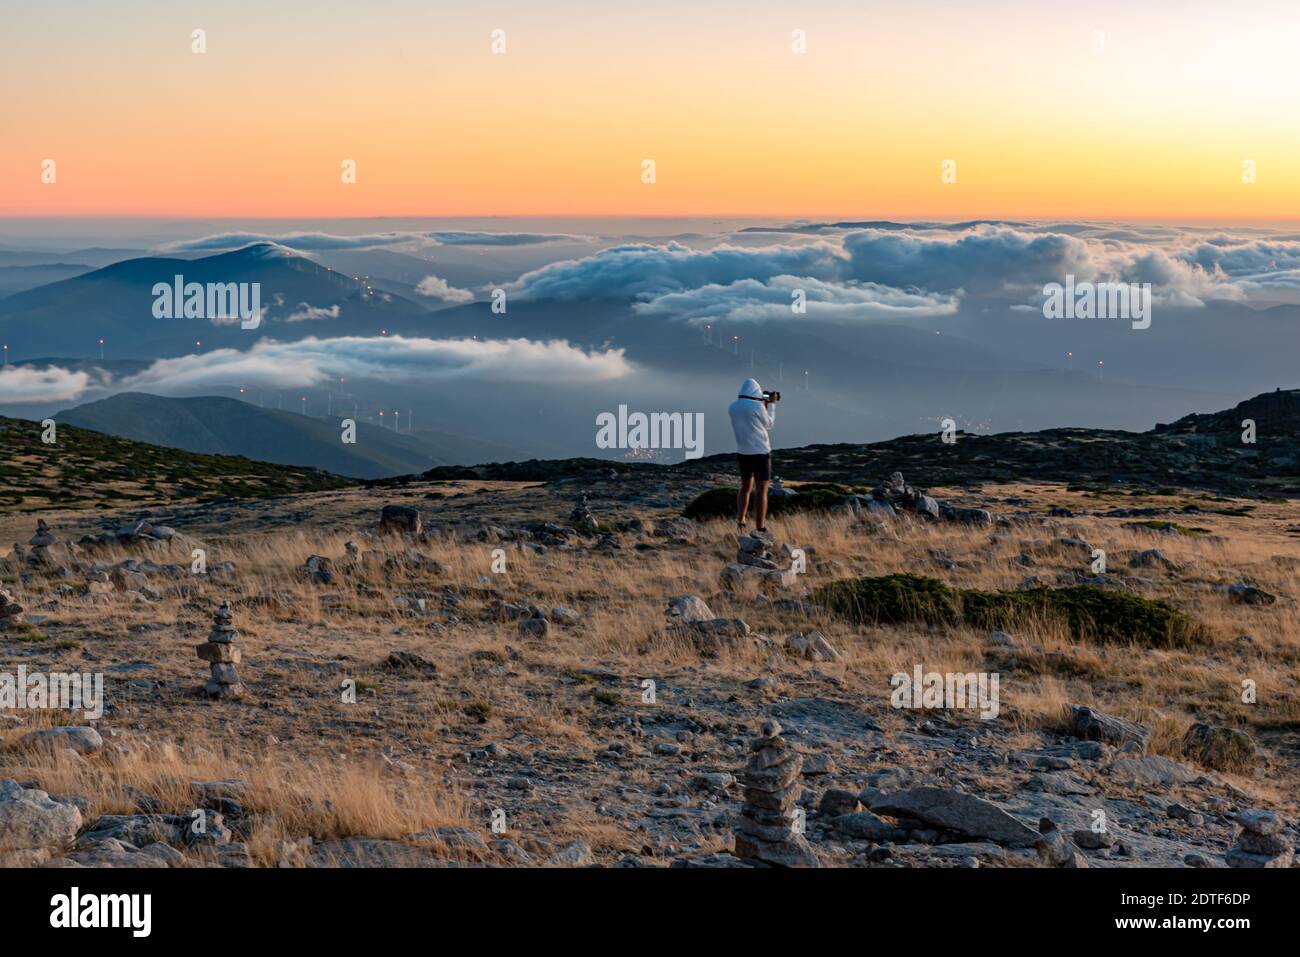 Sunset at the top of the Serra da Estrela Natural Park, Portugal with low clouds and a person watching the landscape with his camera Stock Photo